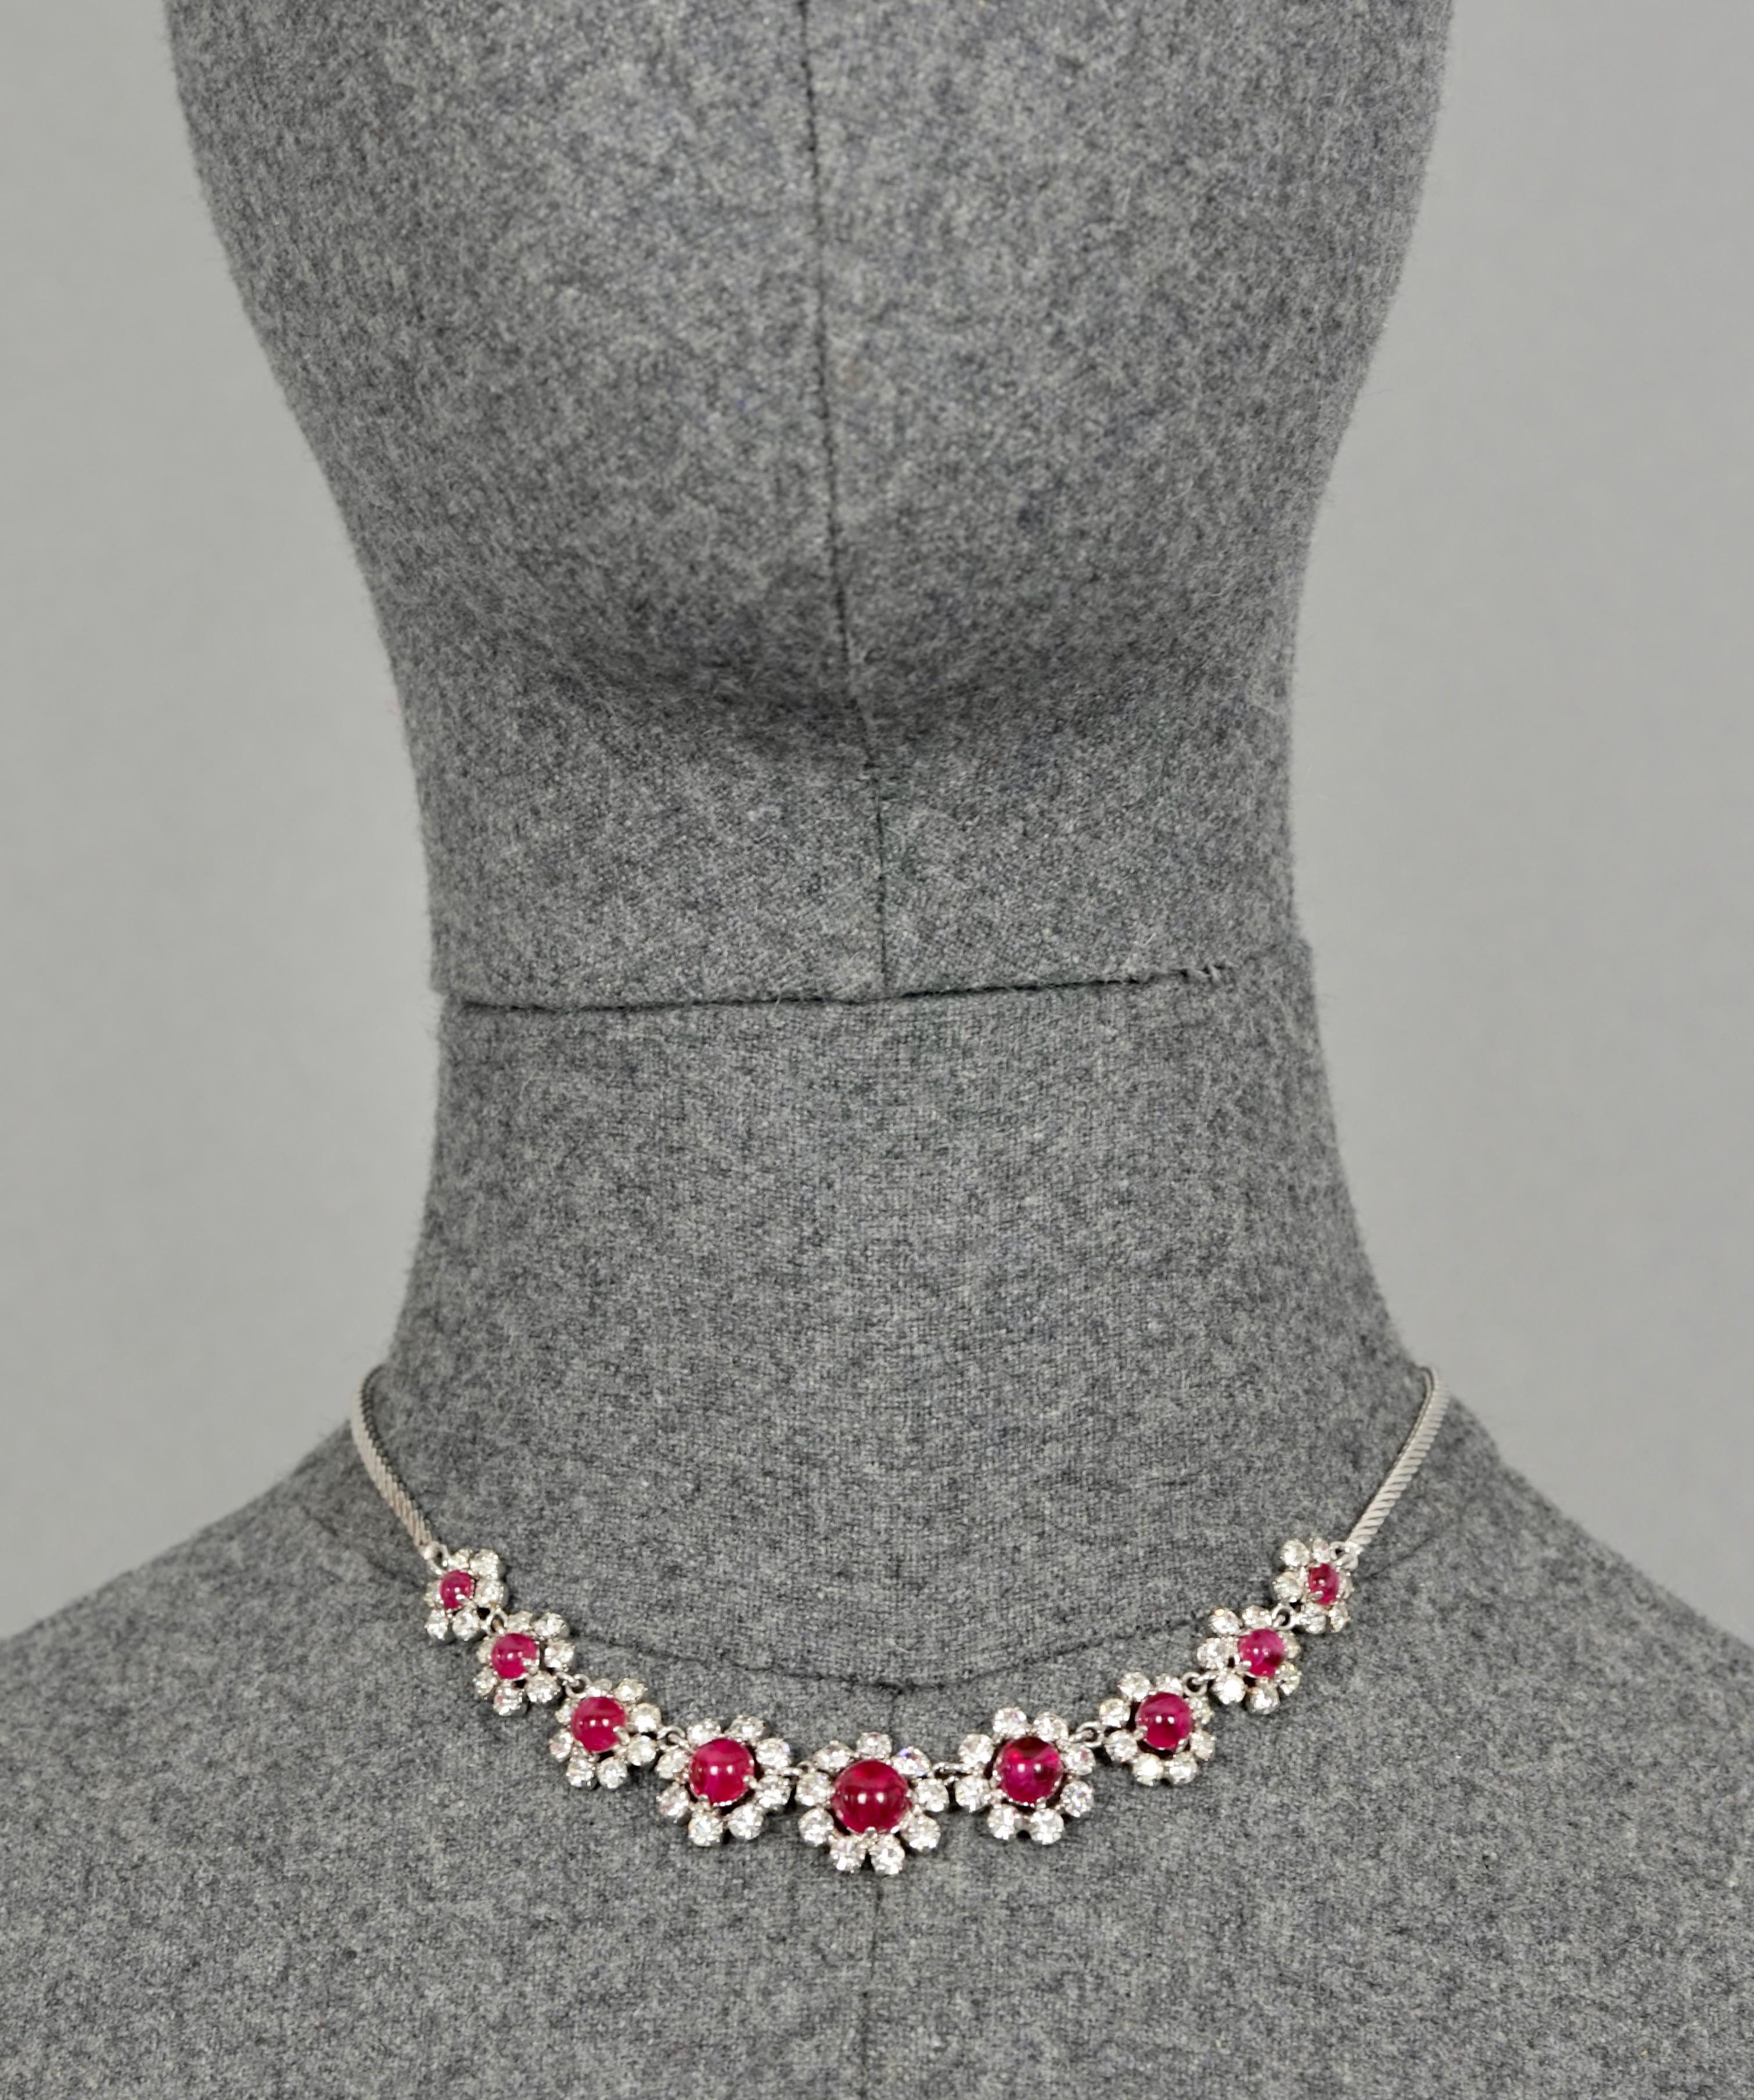 Vintage 1973 CHRISTIAN DIOR Red Glass Cabochon Rhinestone Necklace

Measurements:
Height: 0.63 inch (1.6 cm)
Wearable Length: 15.75 inches to 17.71 inches (40 cm to 45 cm)

Features:
- 100% Authentic CHRISTIAN DIOR.
- Red round glass cabochon with